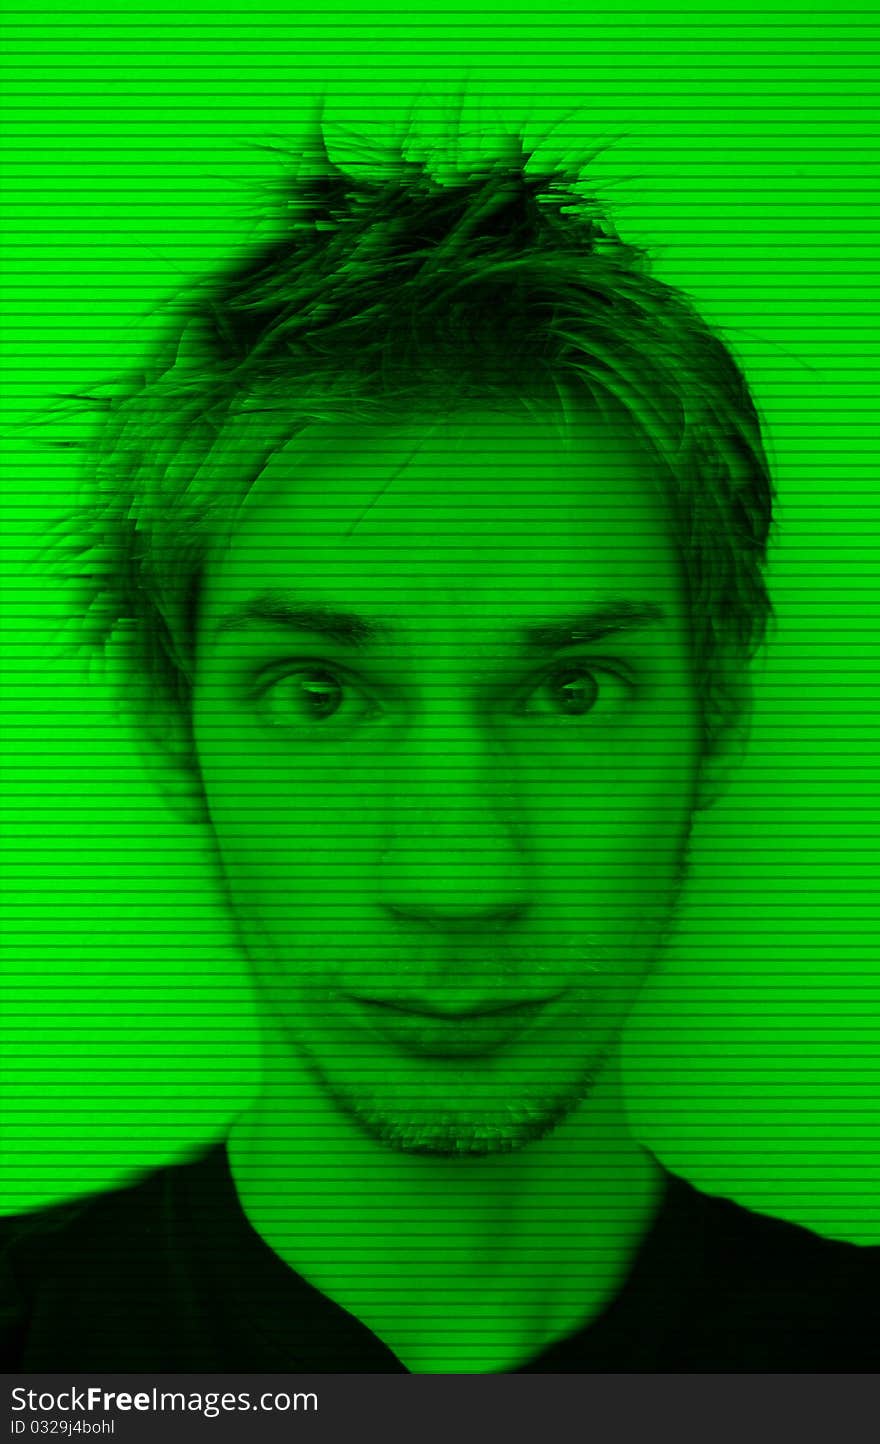 Young man with emo hair looking straight at camera in night vision